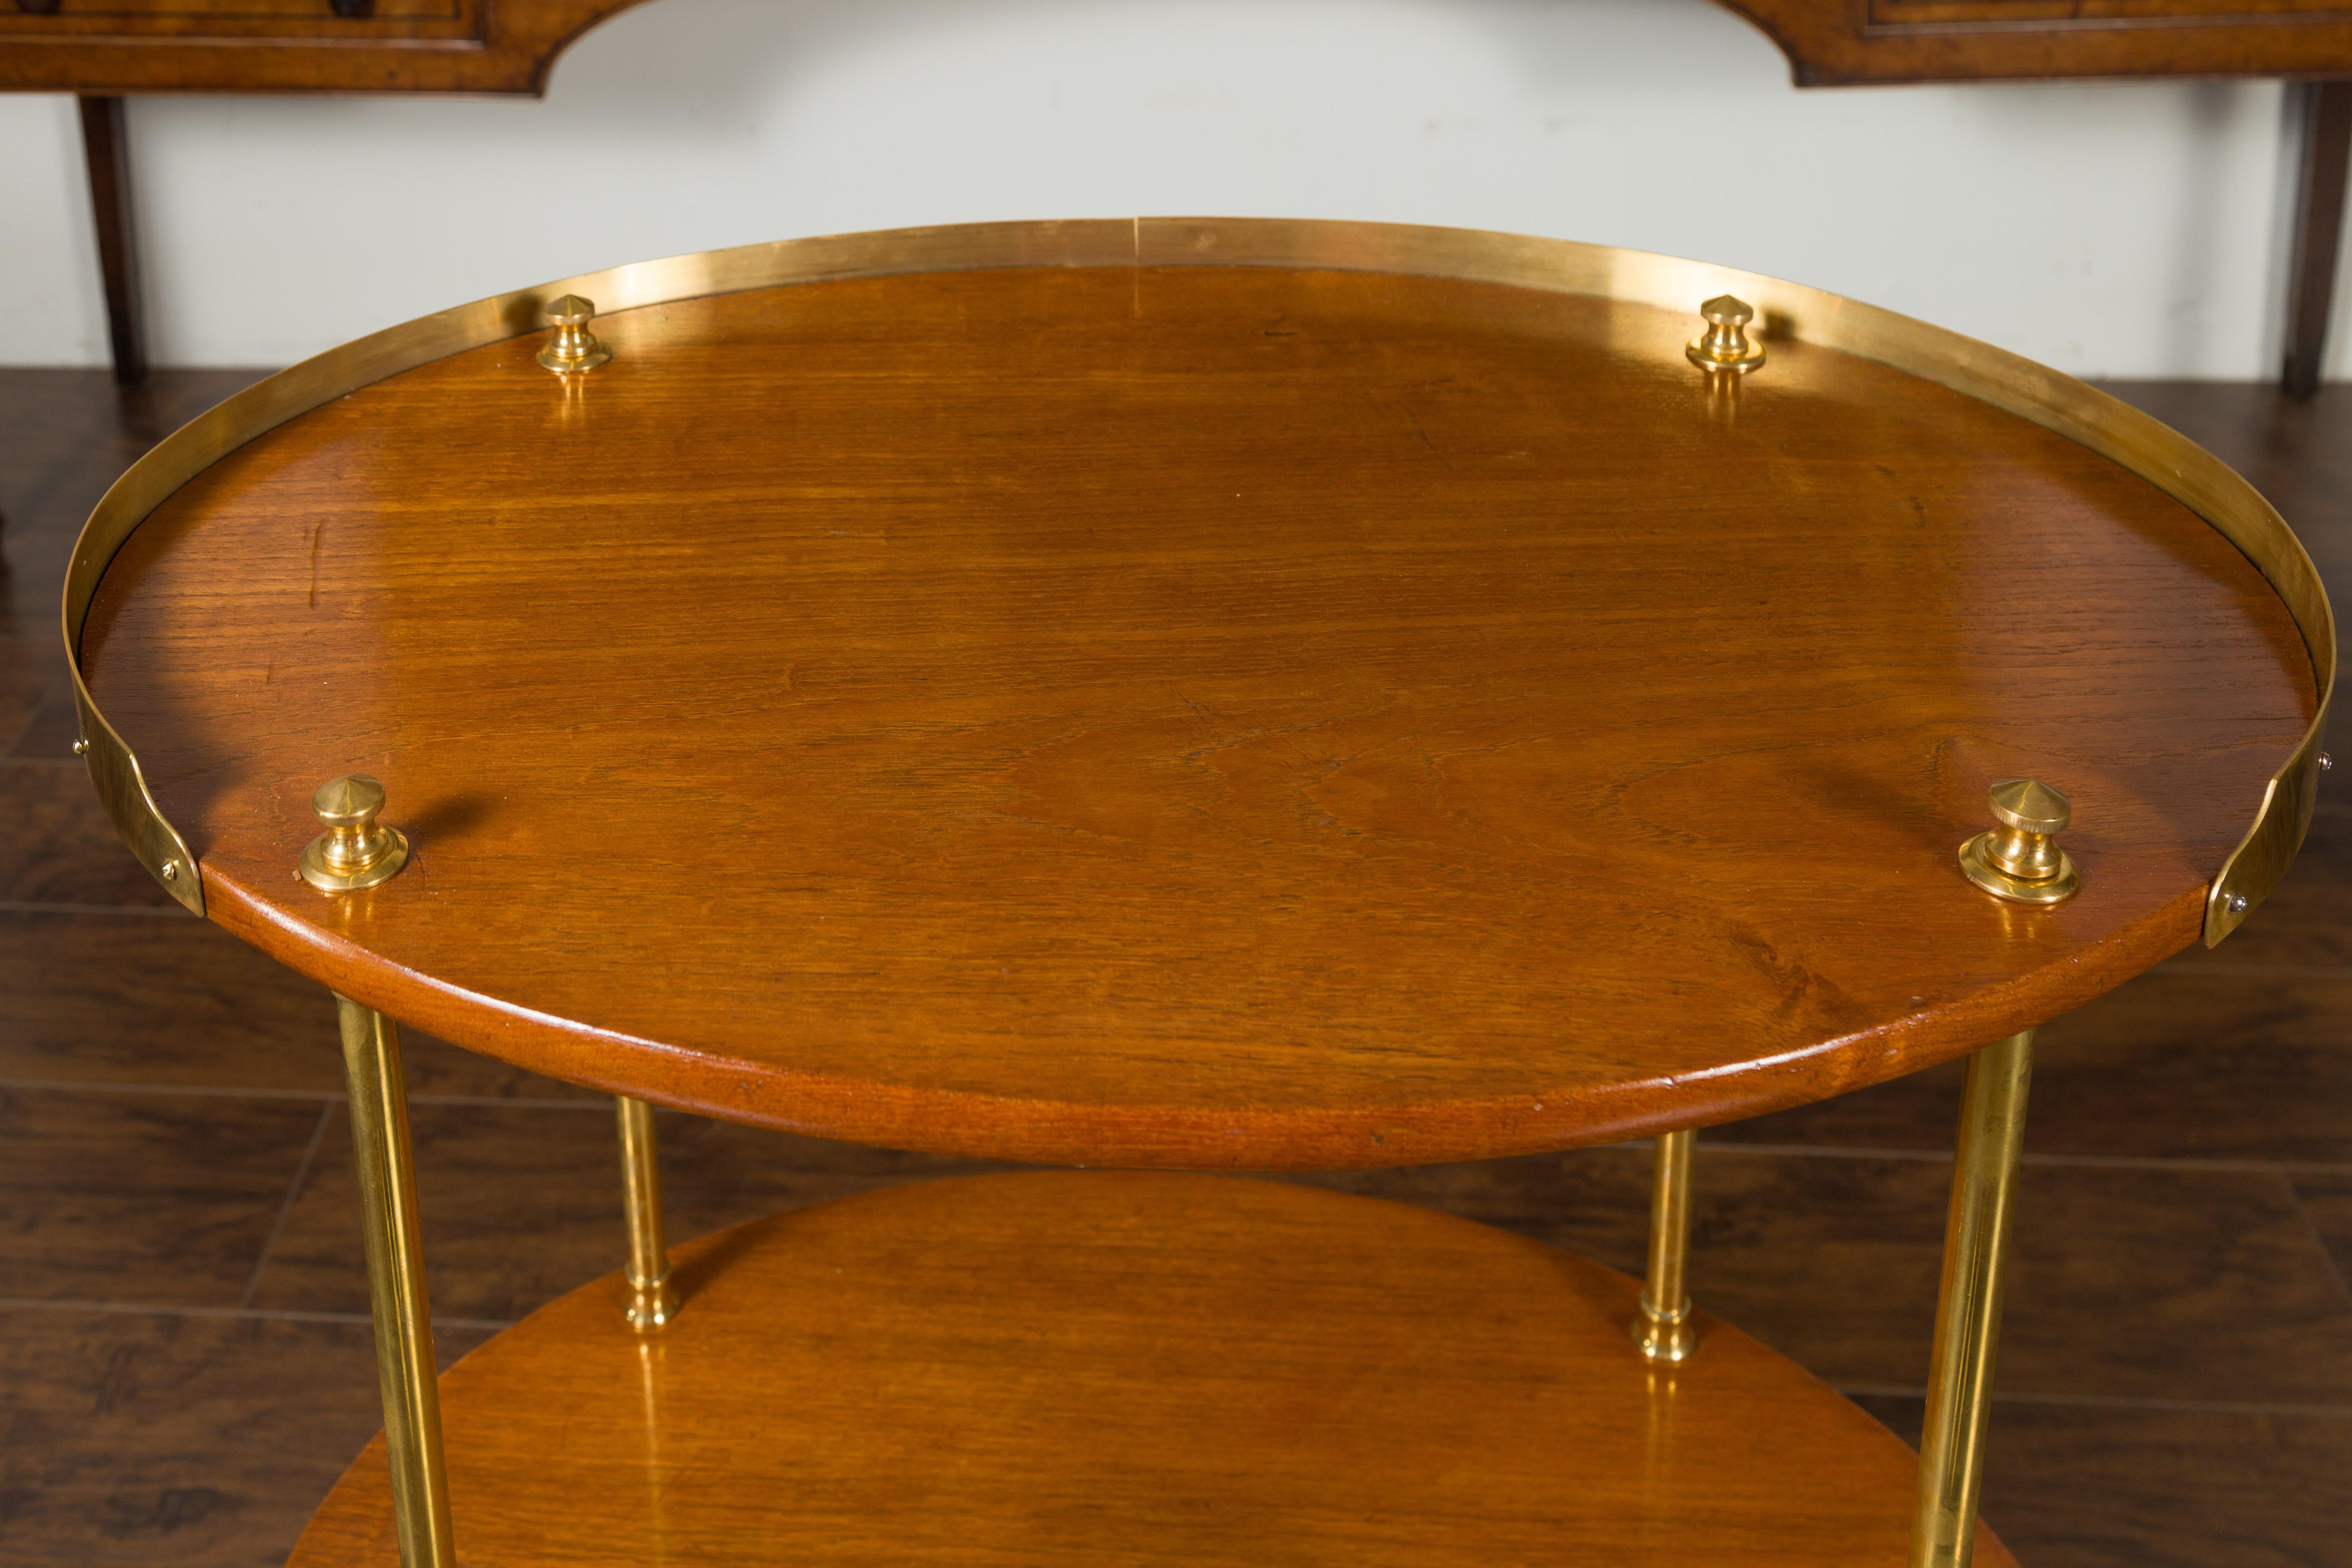 English Midcentury Mahogany Oval Two-Tiered Table with Brass Accents In Good Condition For Sale In Atlanta, GA